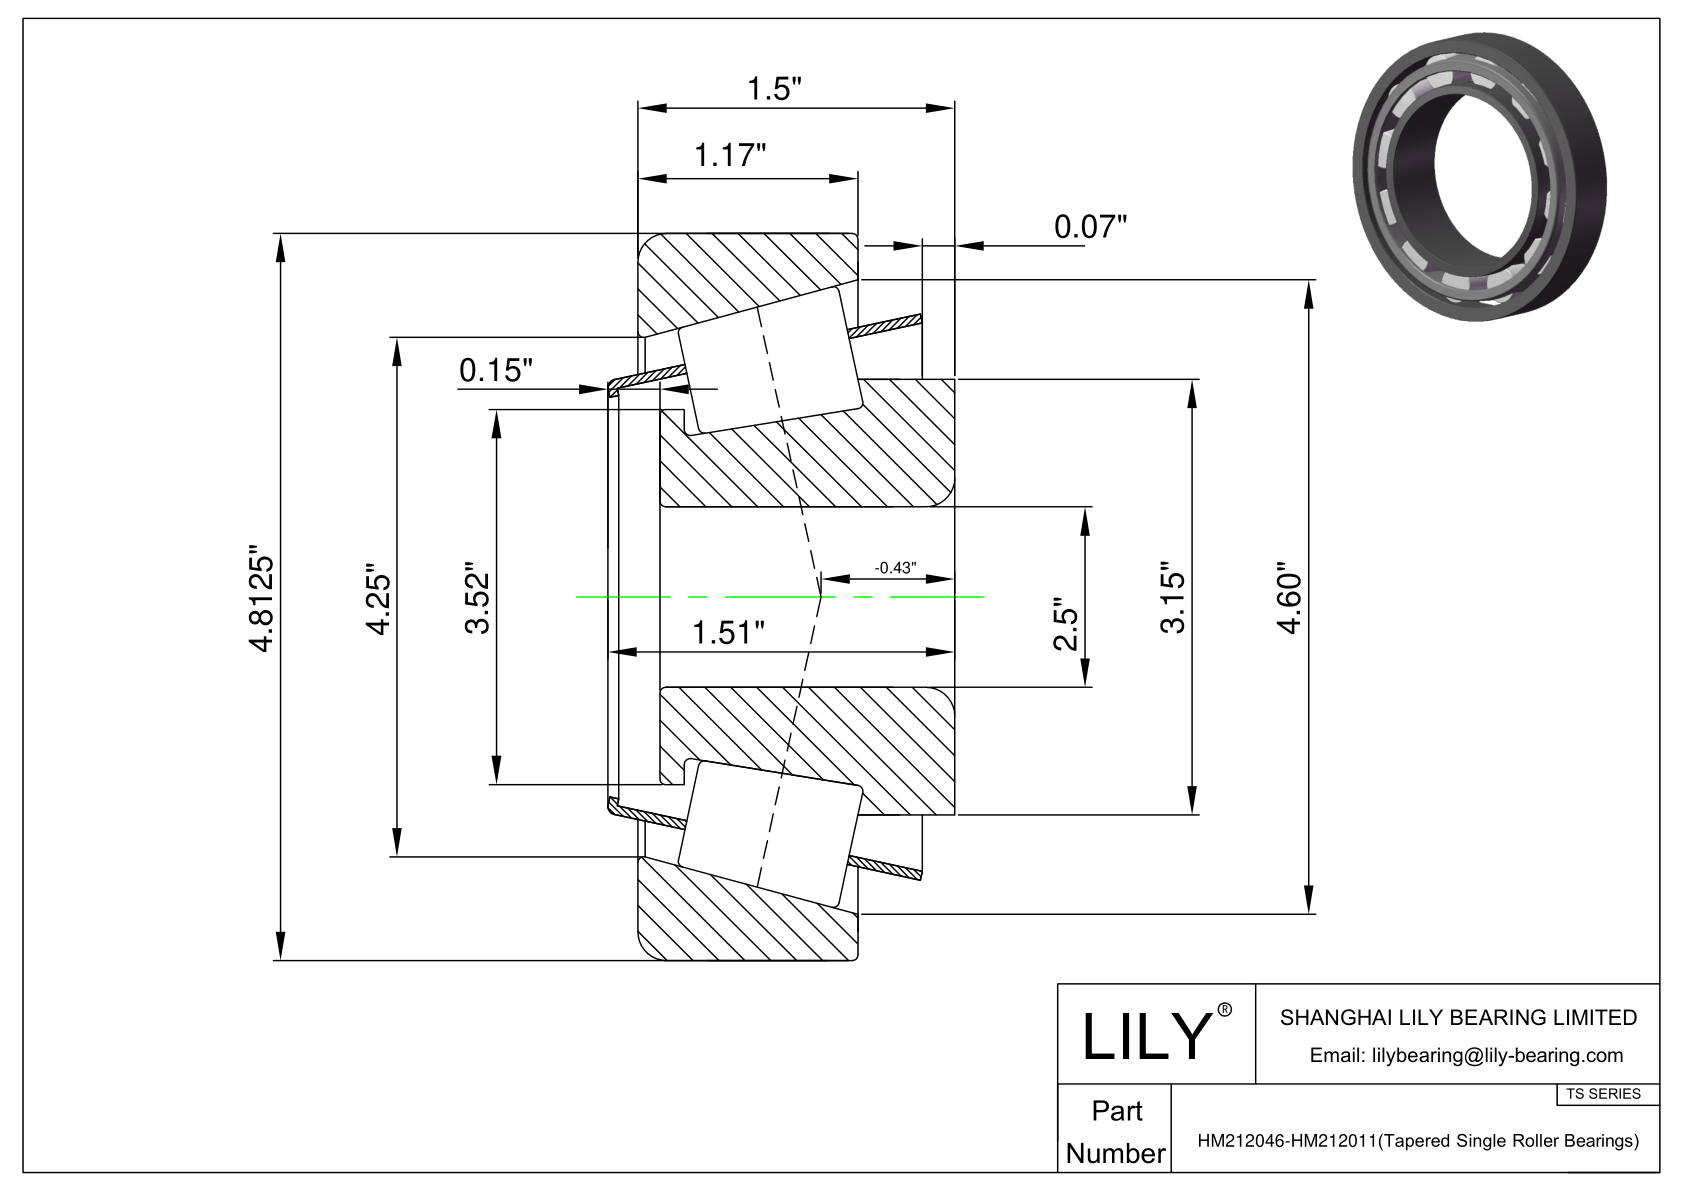 HM212046-HM212011 TS (Tapered Single Roller Bearings) (Imperial) cad drawing